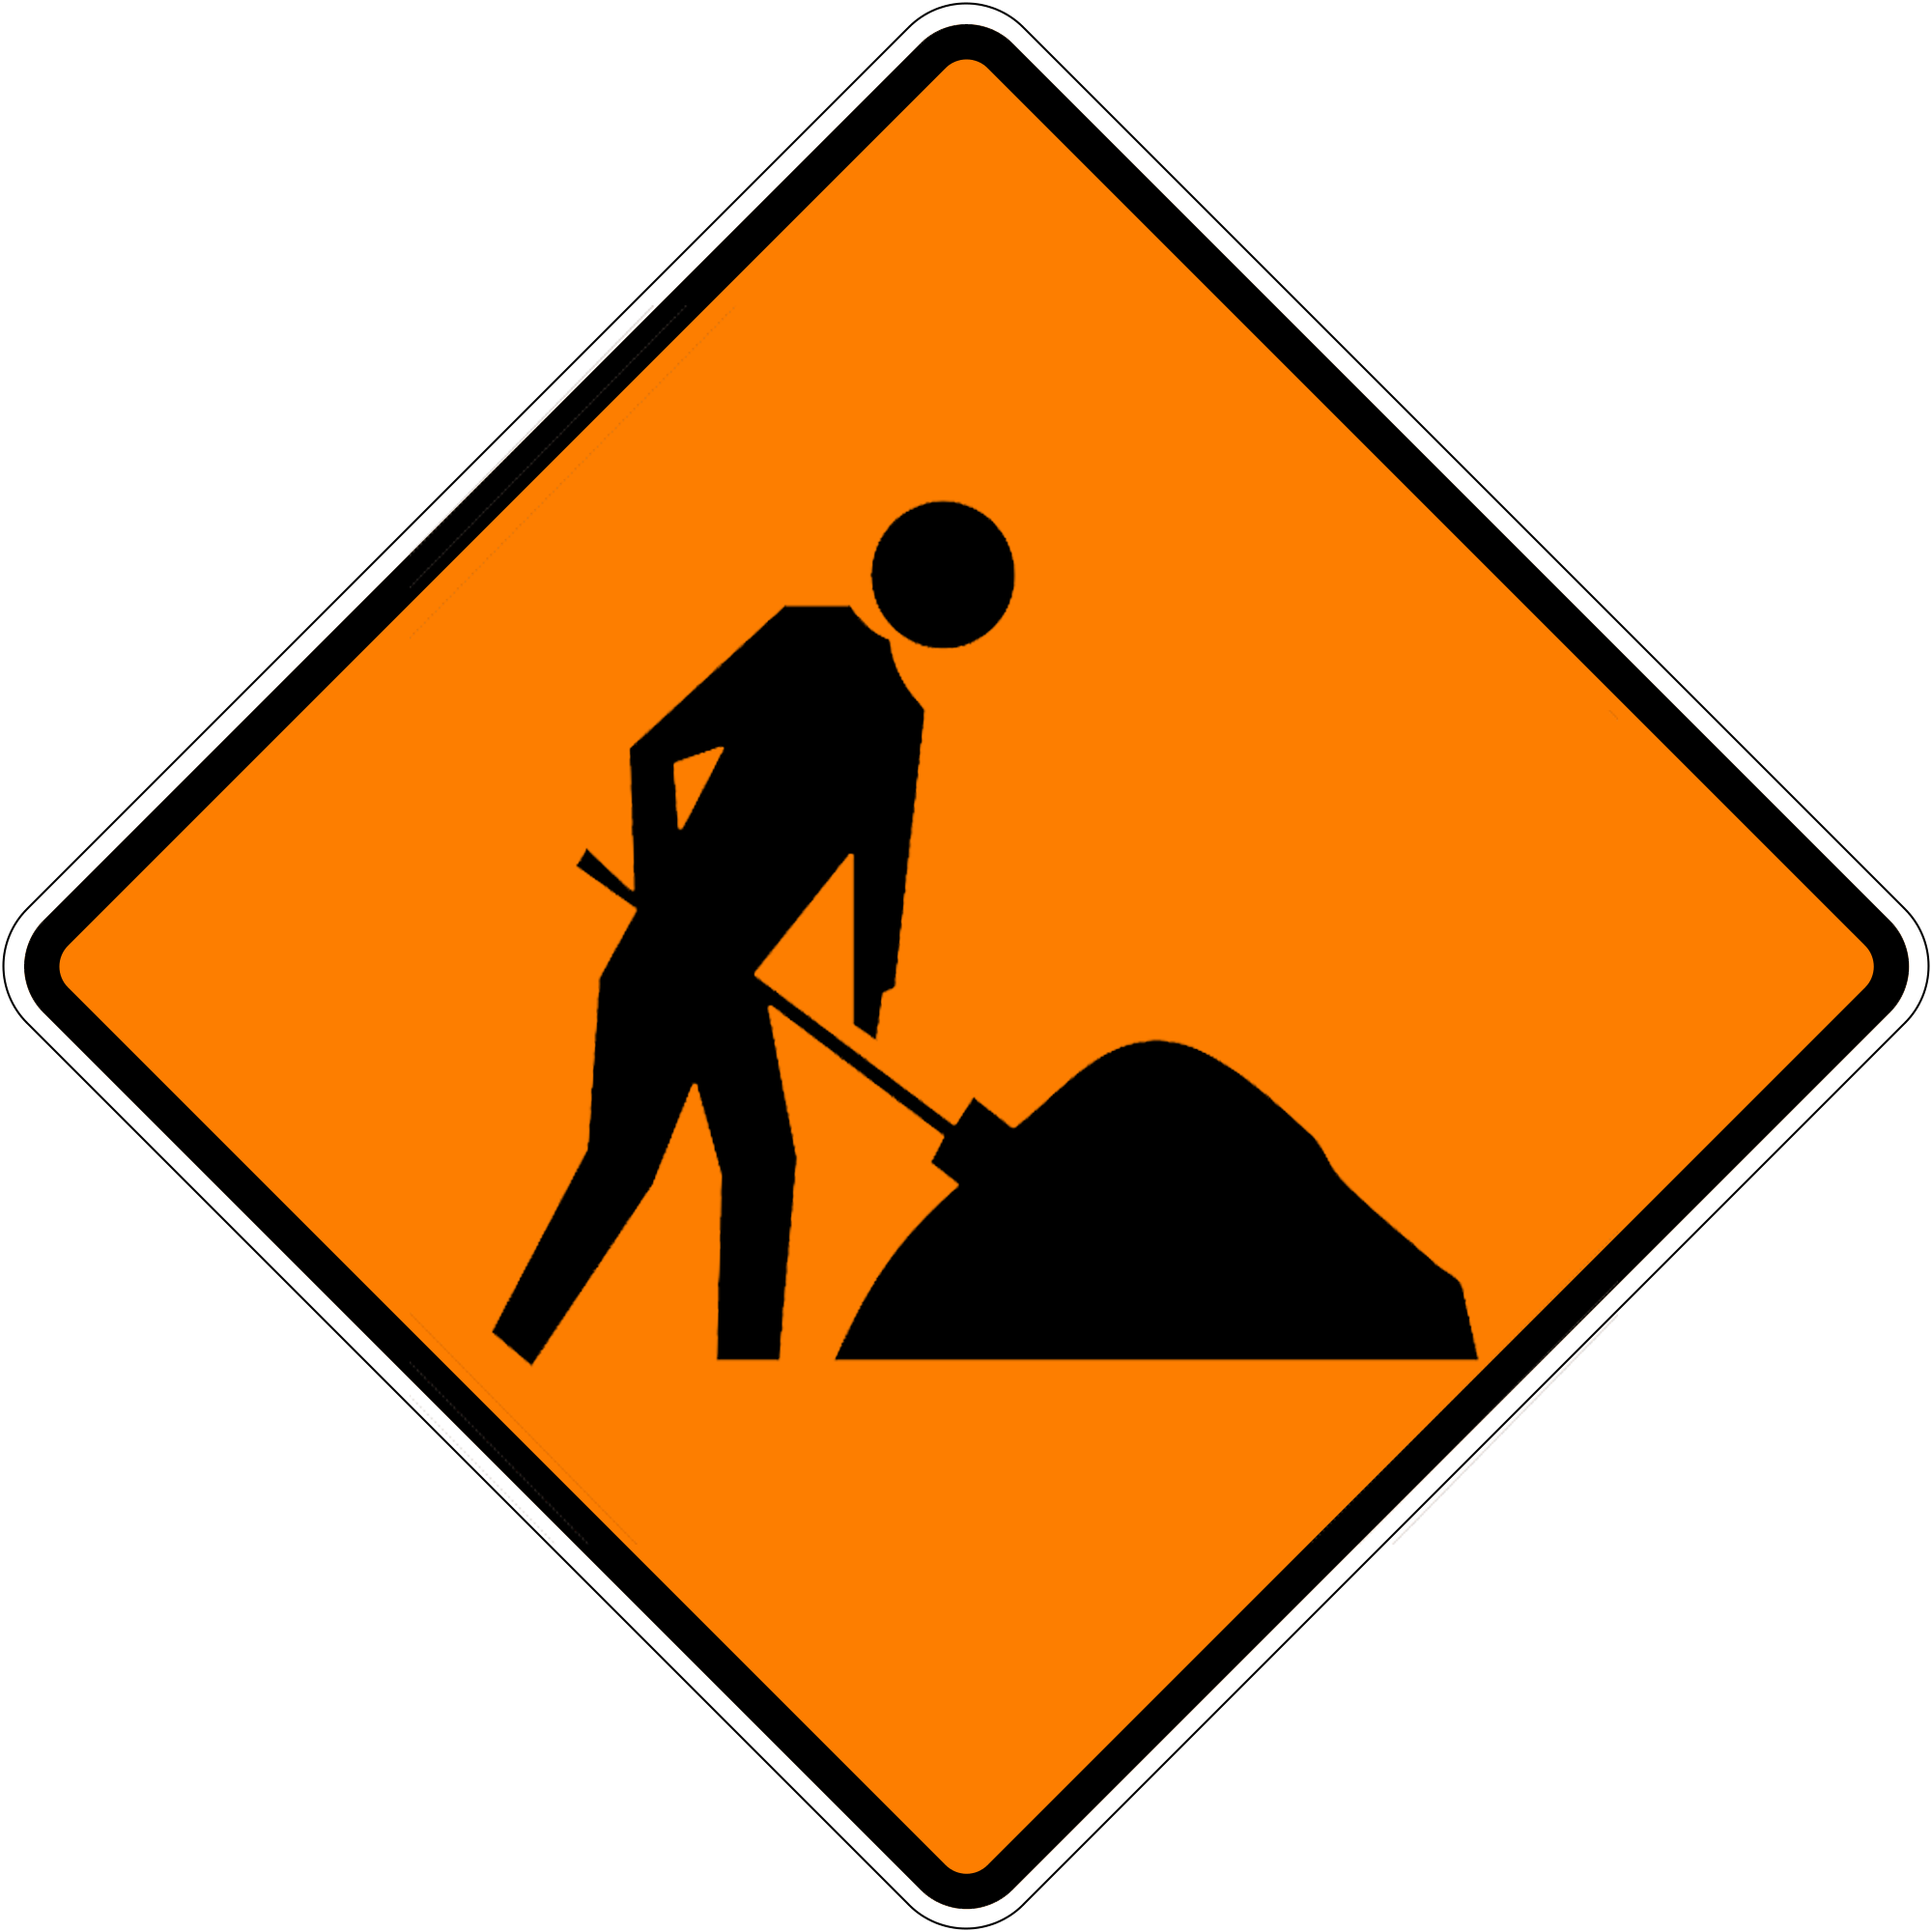 Road Works Ahead Pw03 2 01 - Construction Sign No Background (2000x2000)